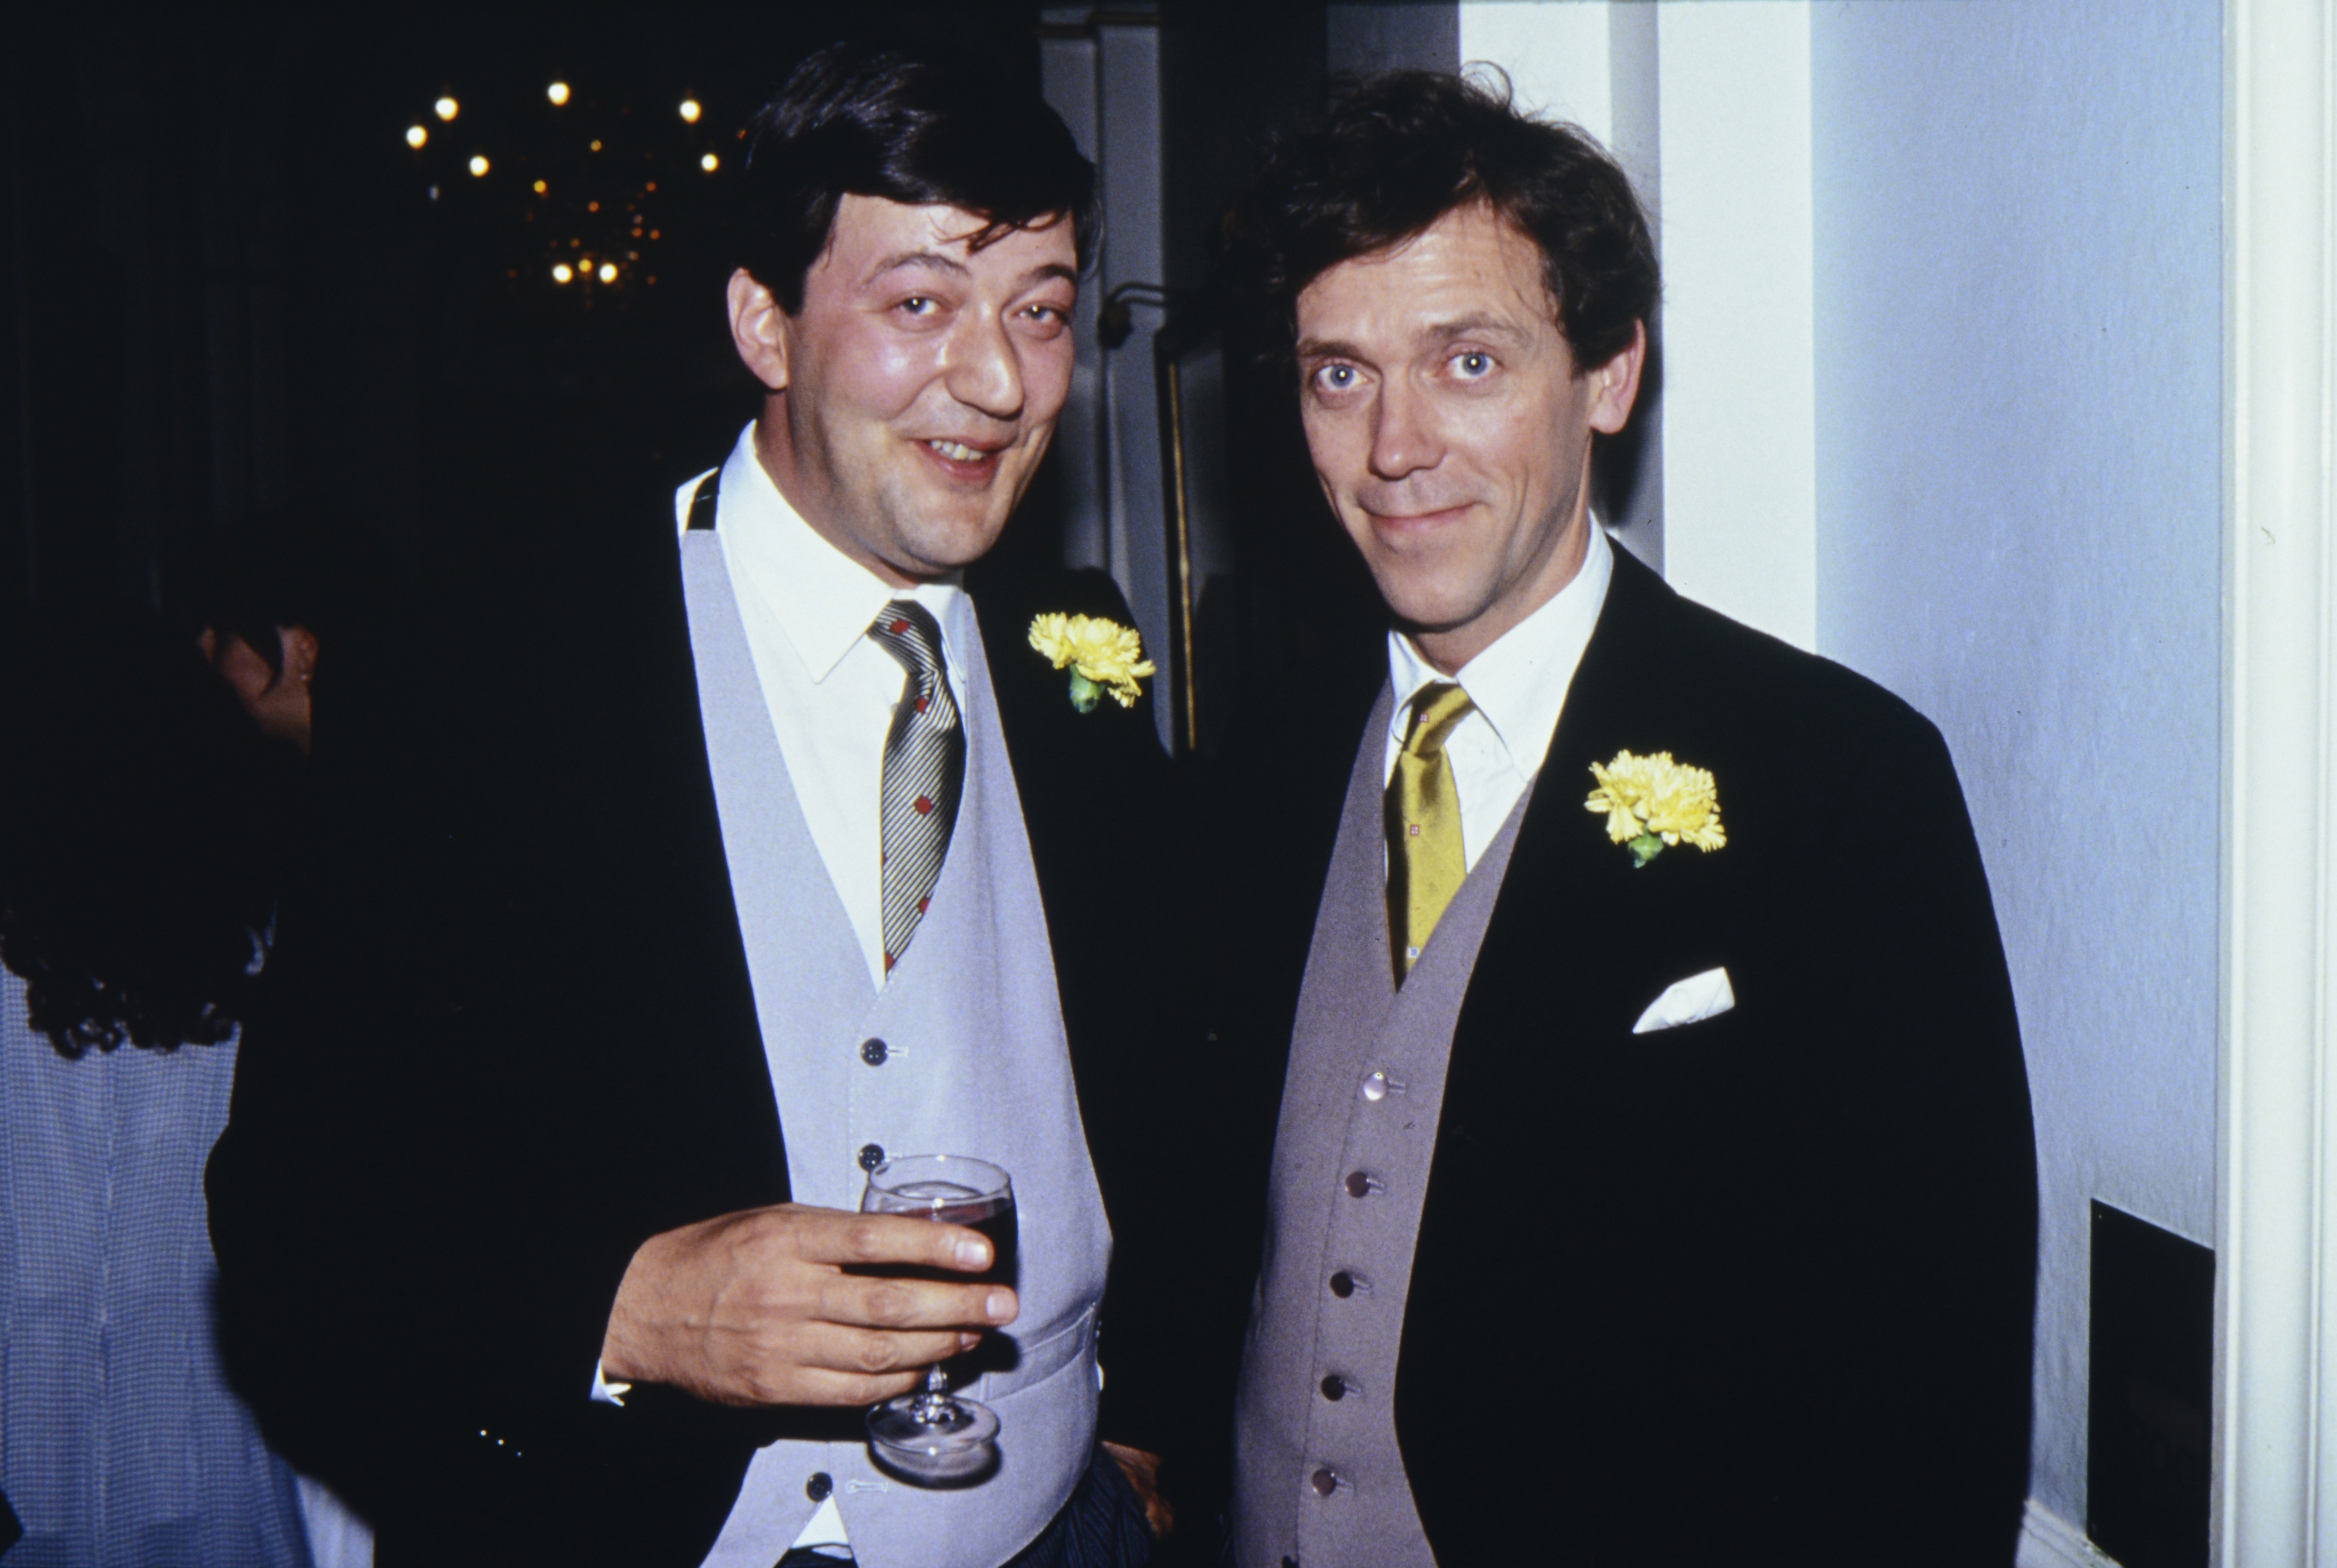 Stephen Fry and Hugh Laurie attend the UK premiere of "Four Weddings and A Funeral" in Leicester Square on May 11, 1994 in London, England. | Source: Getty Images